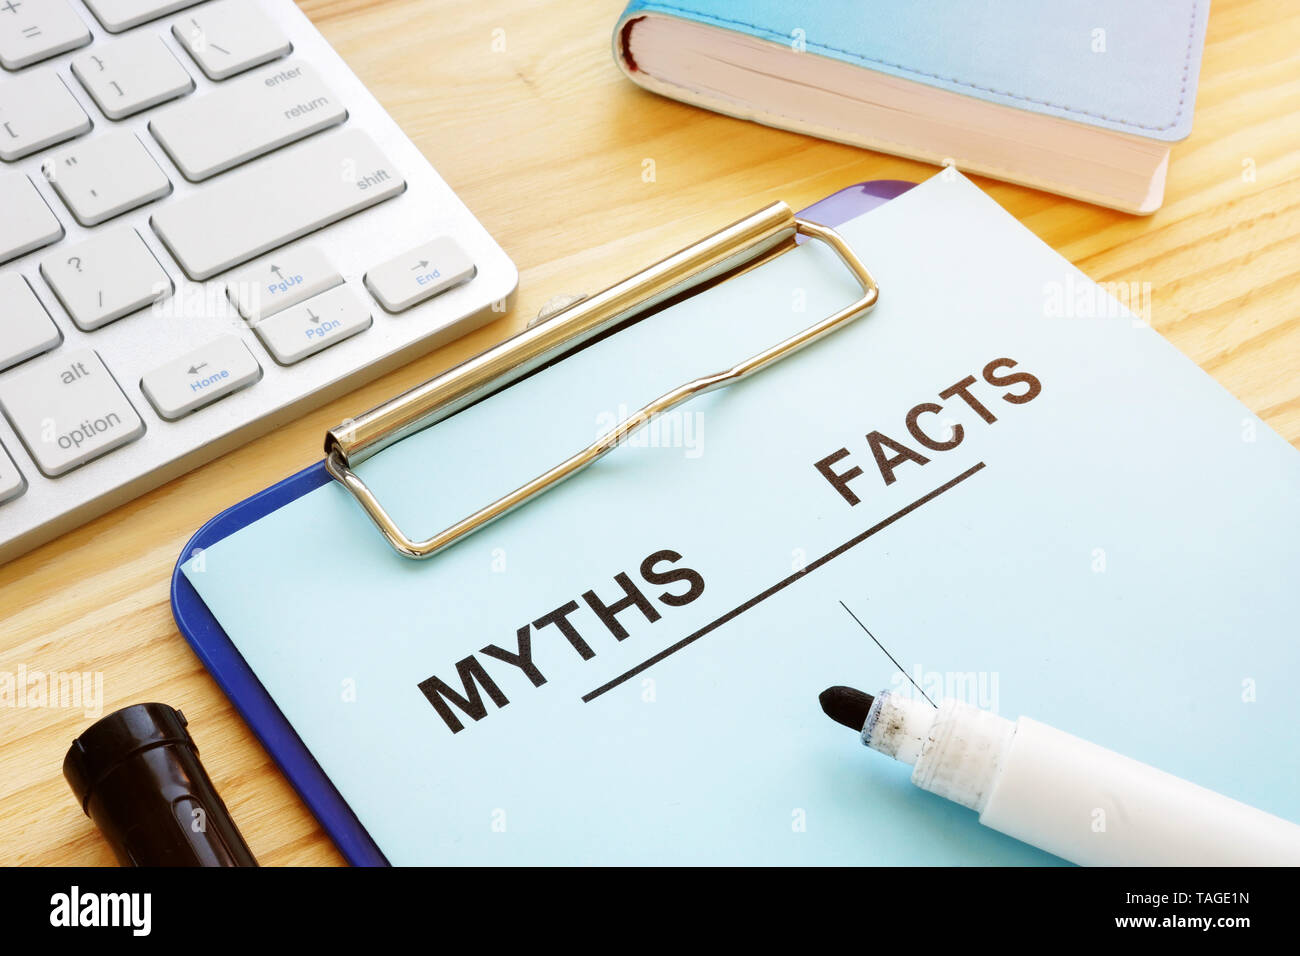 Myths and facts list with pen. Fake news concept. Stock Photo